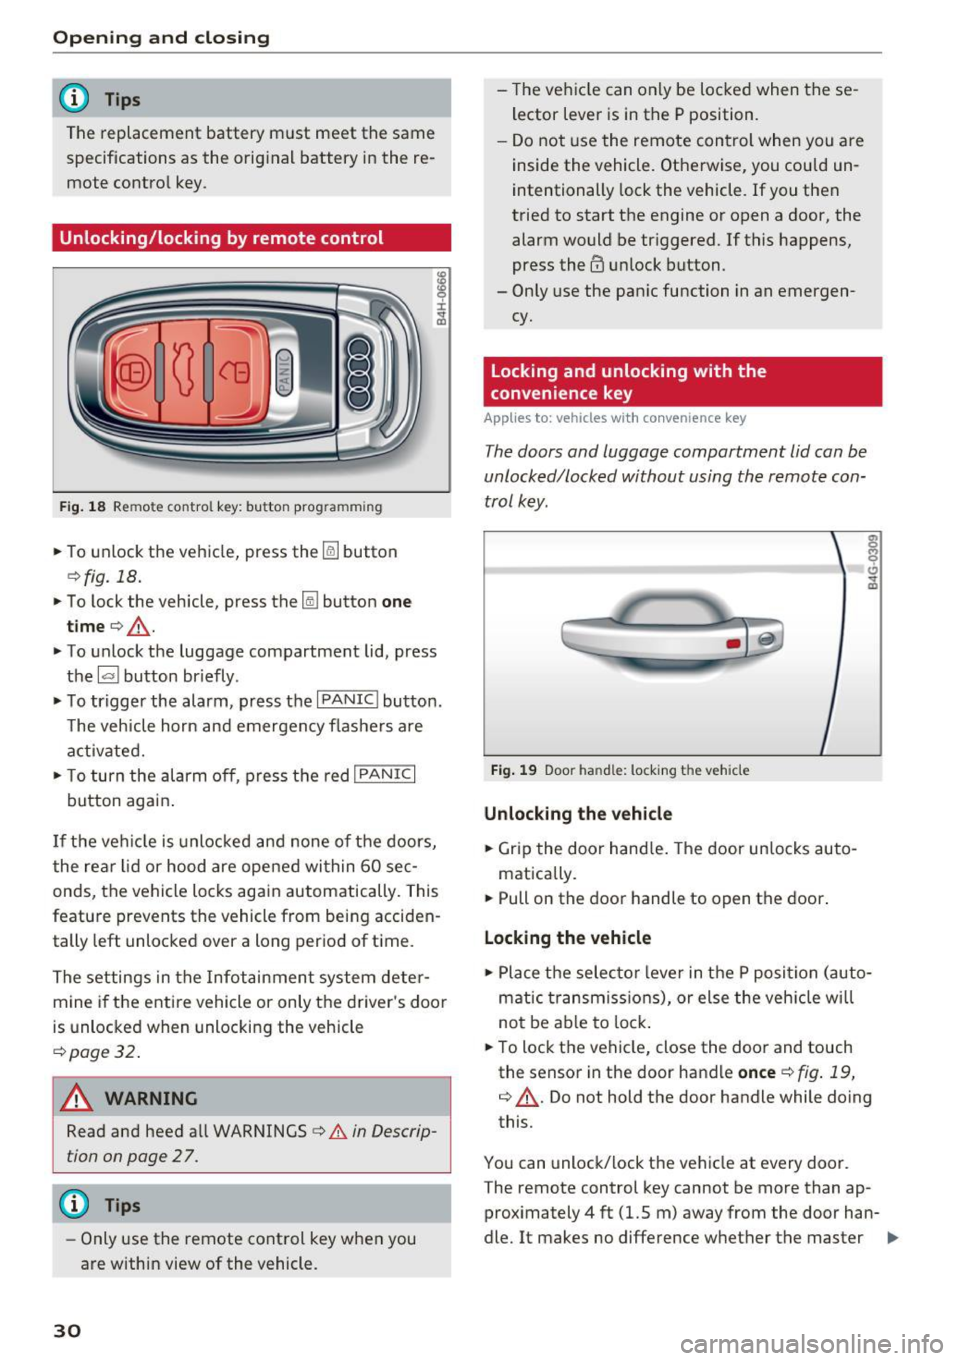 AUDI A6 2017  Owners Manual Opening  and clo sin g 
@ Tips 
The  replacement  battery  must  meet  the  same 
specifications  as  the  orig inal  battery  in the  re­
mote  control  key. 
Unlocking/locking  by remote  control 
